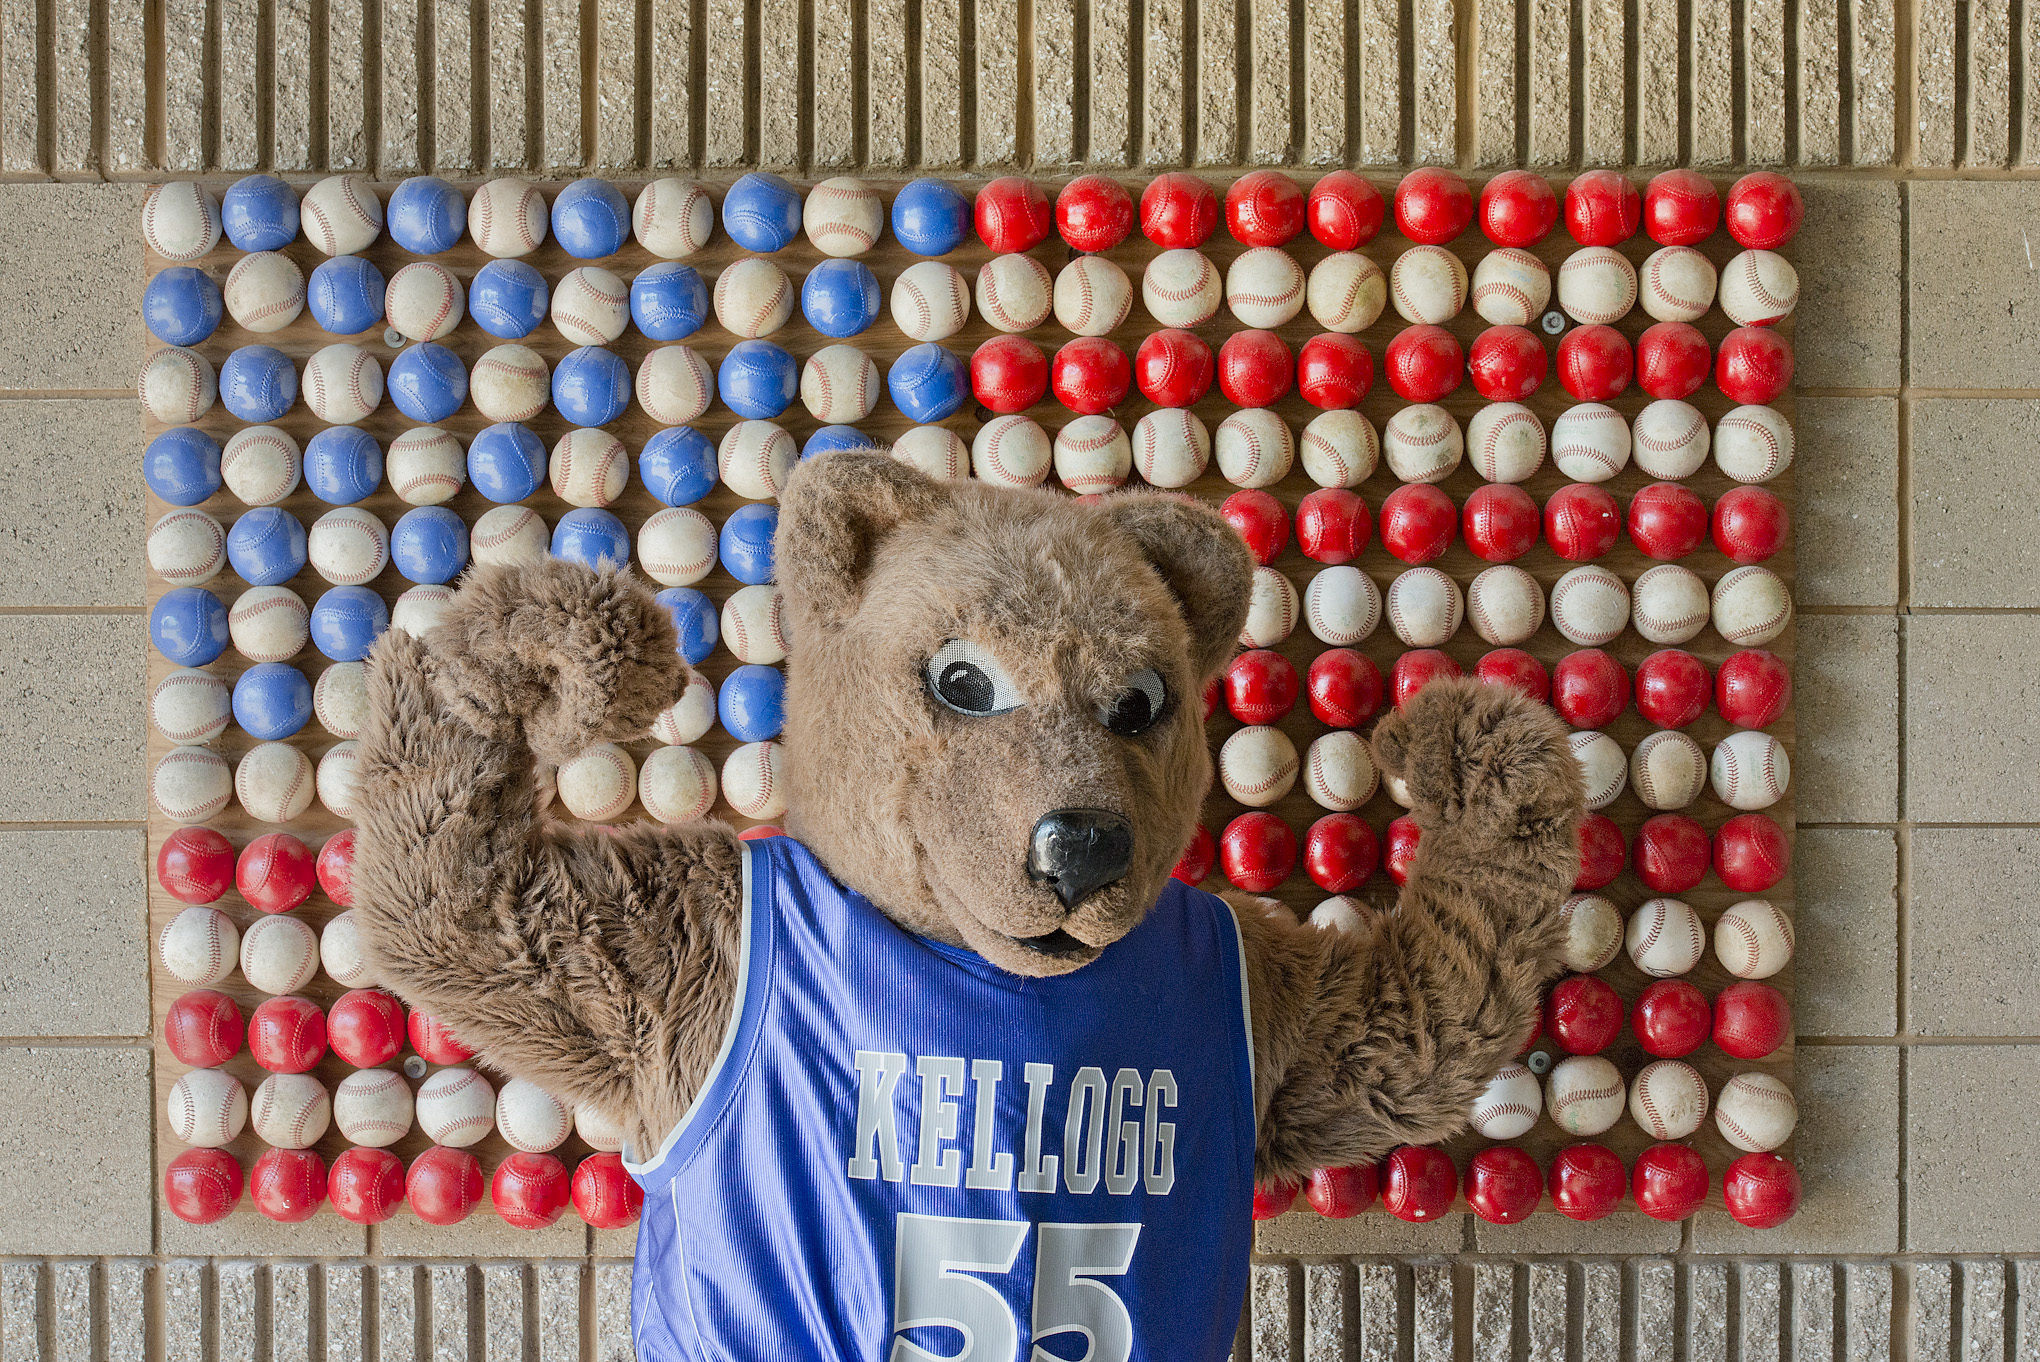 KCC mascot Blaze flexes in front of an American flag made of baseballs at C.O. Brown Stadium.